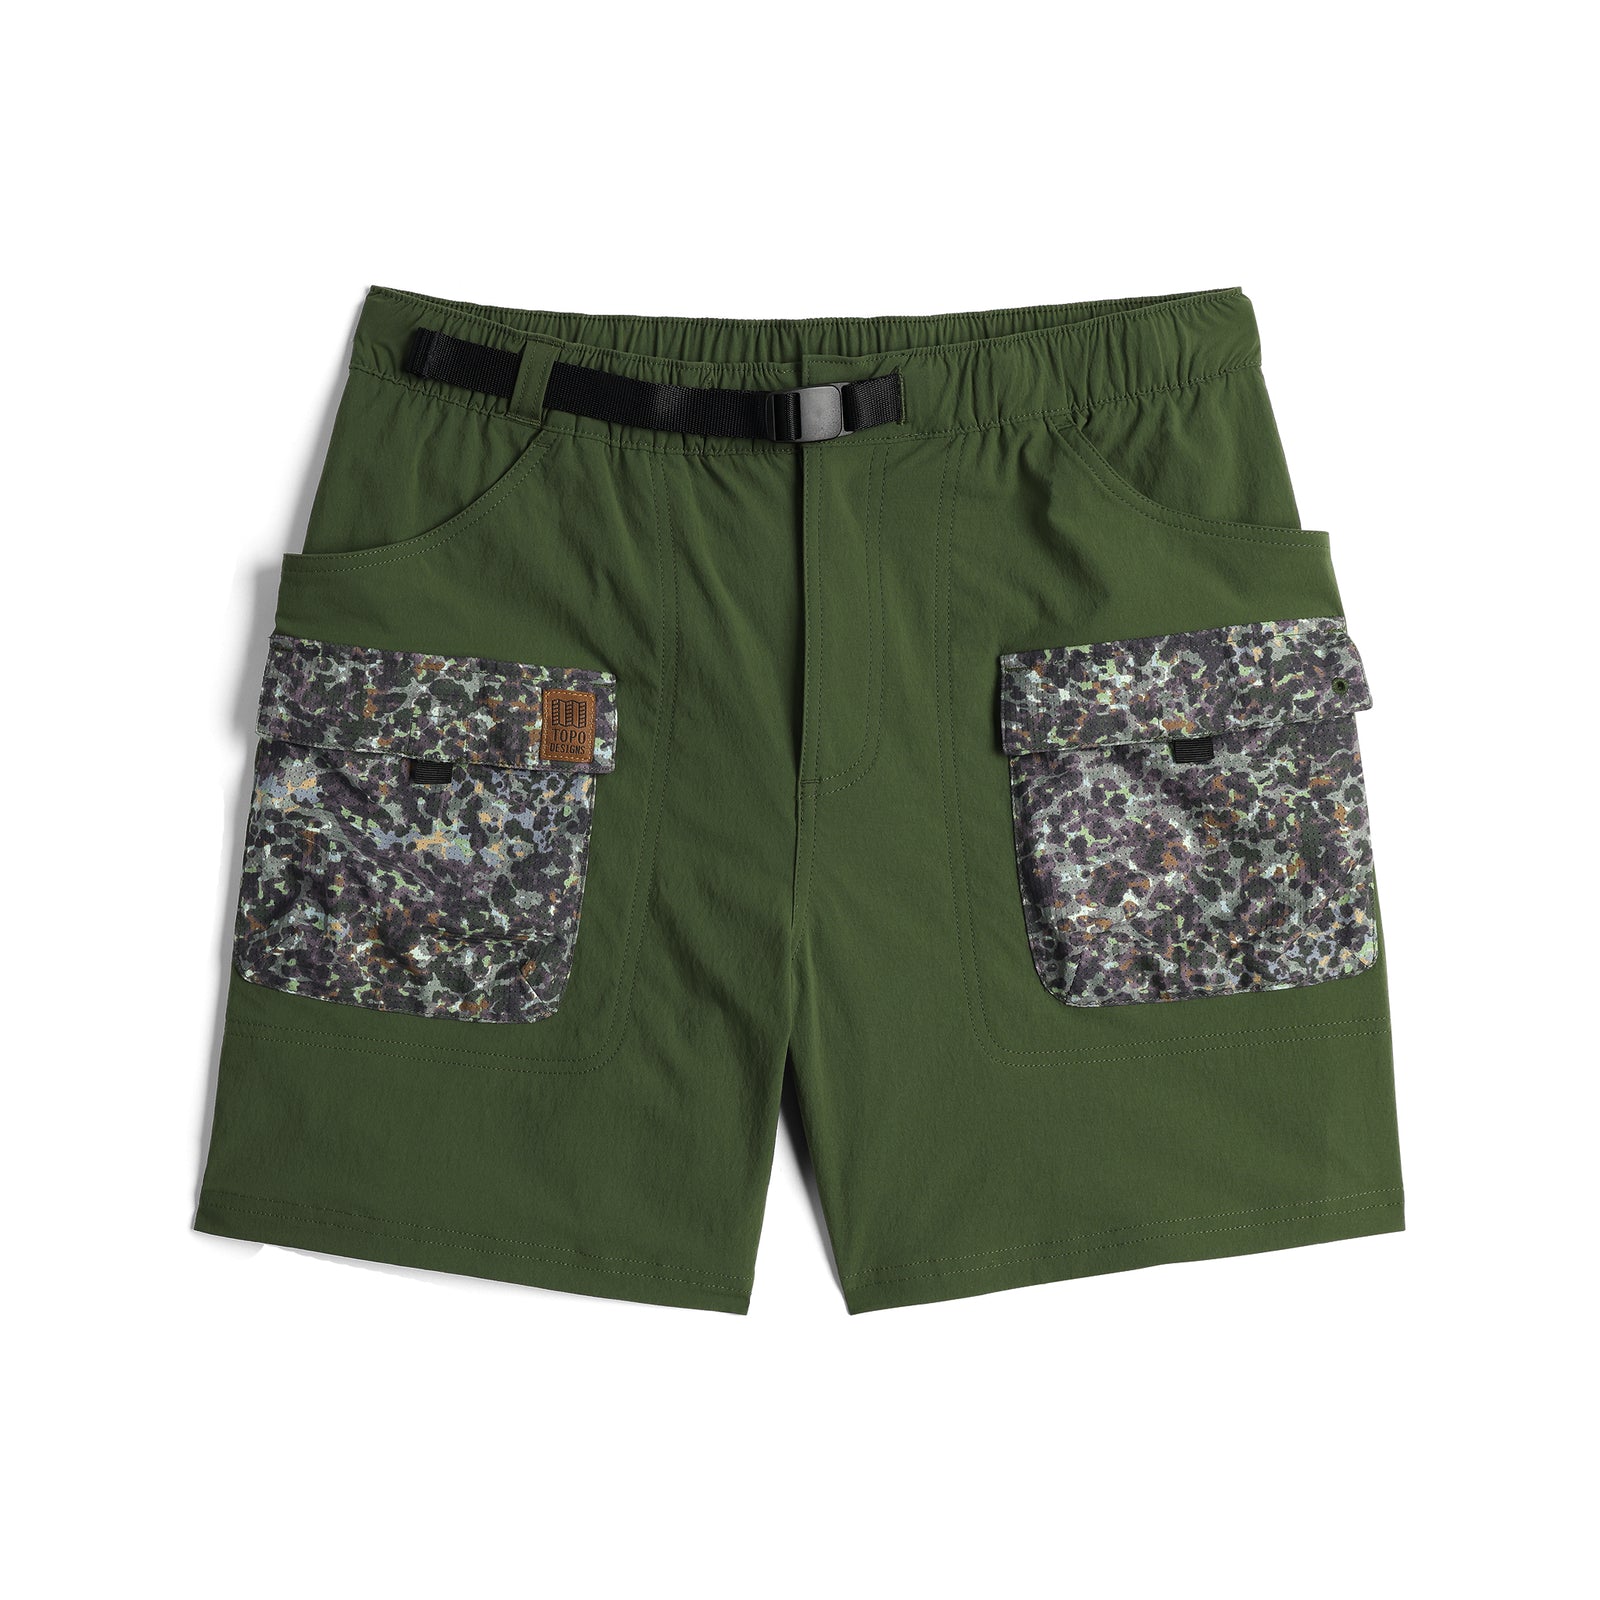 Front View of Topo Designs Retro River Shorts - Men's in "Olive / Olive Meteor"